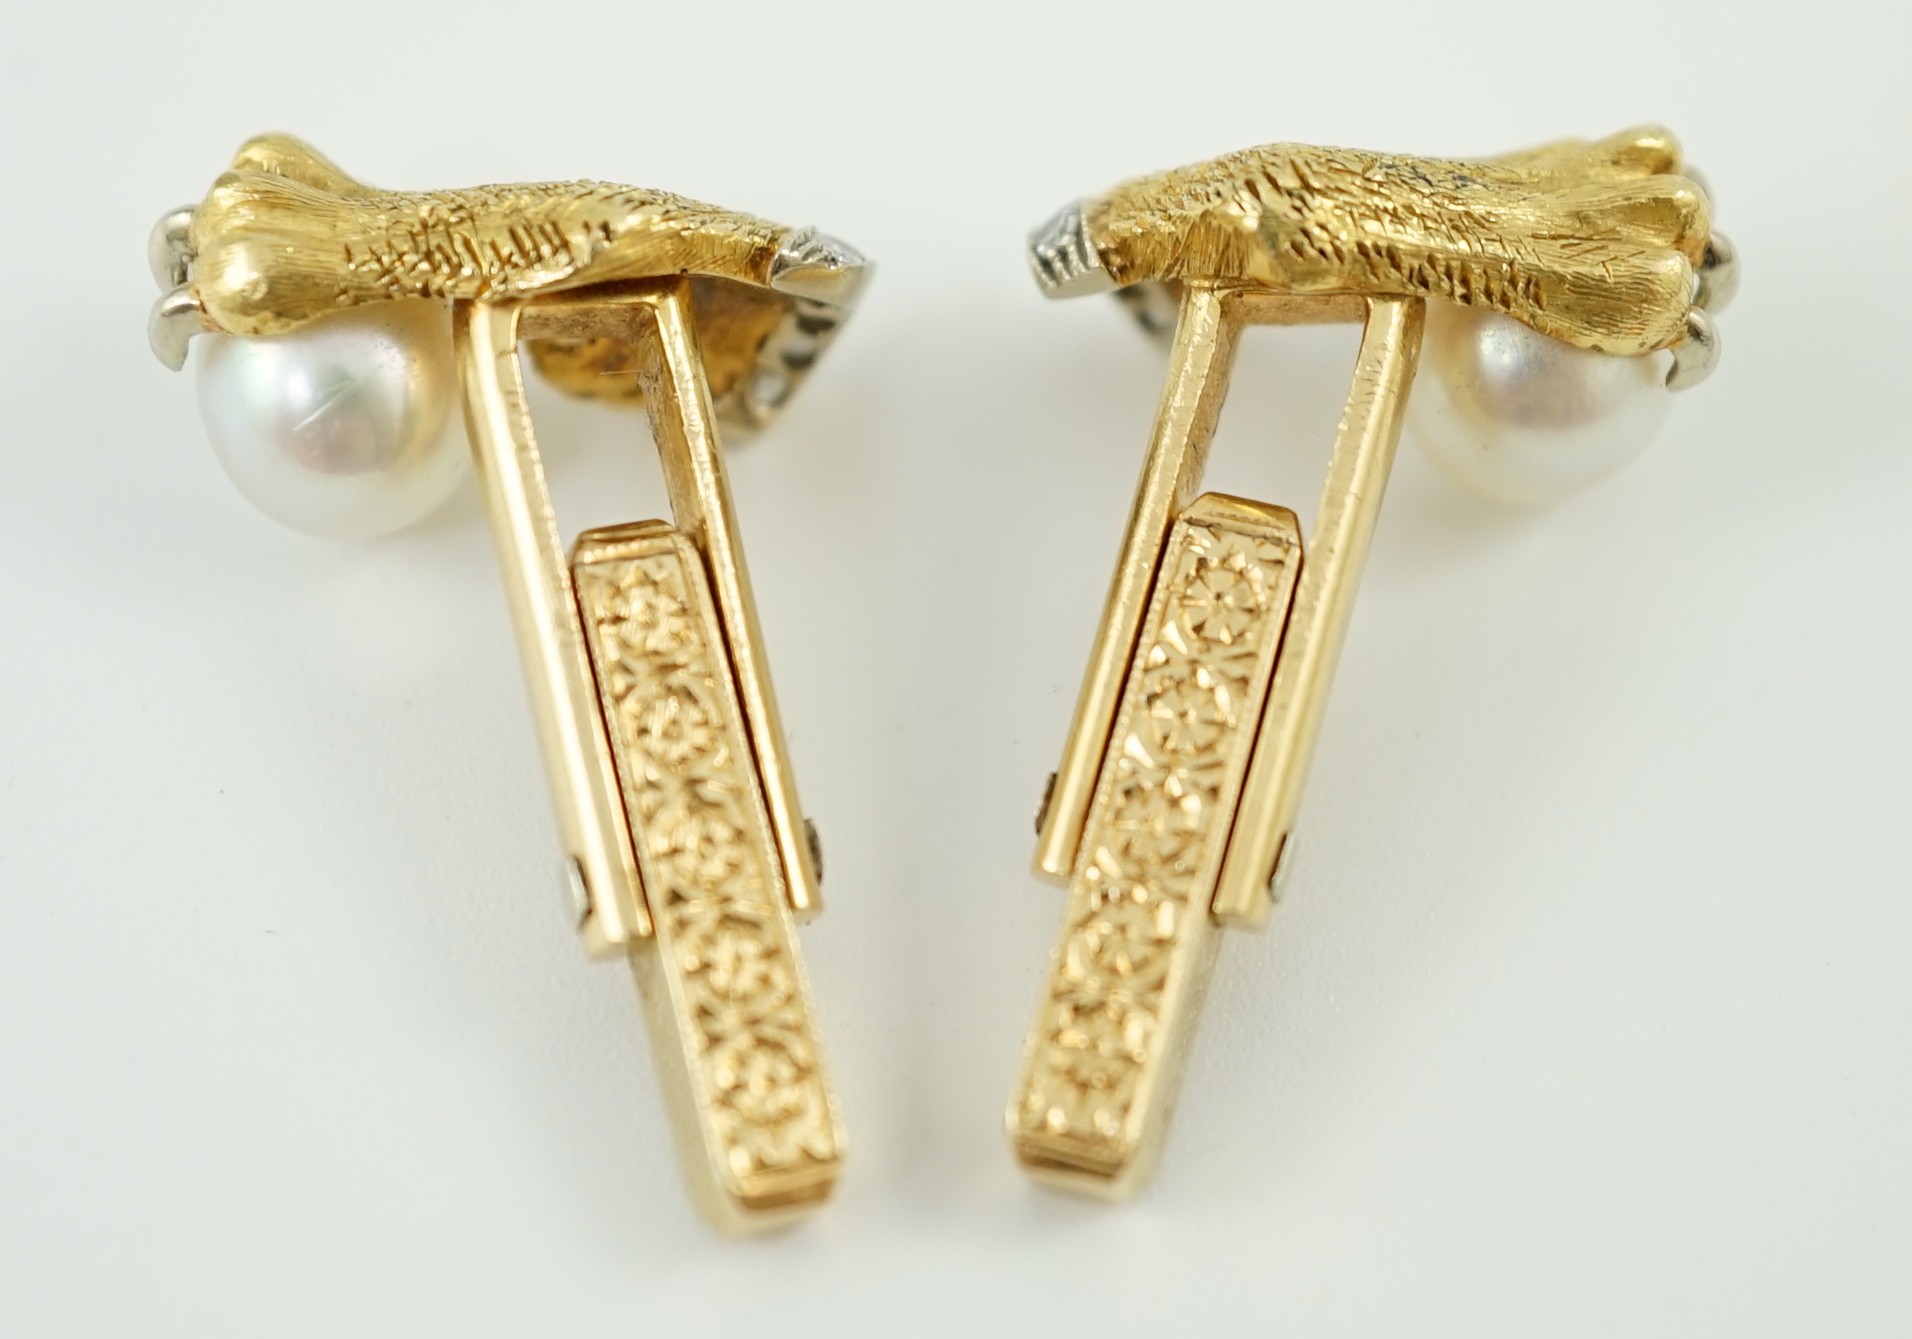 A mid 20th century pair of engraved and textured gold and platinum, diamond chip and cultured pearl cufflinks, each modelled as a lion's paw